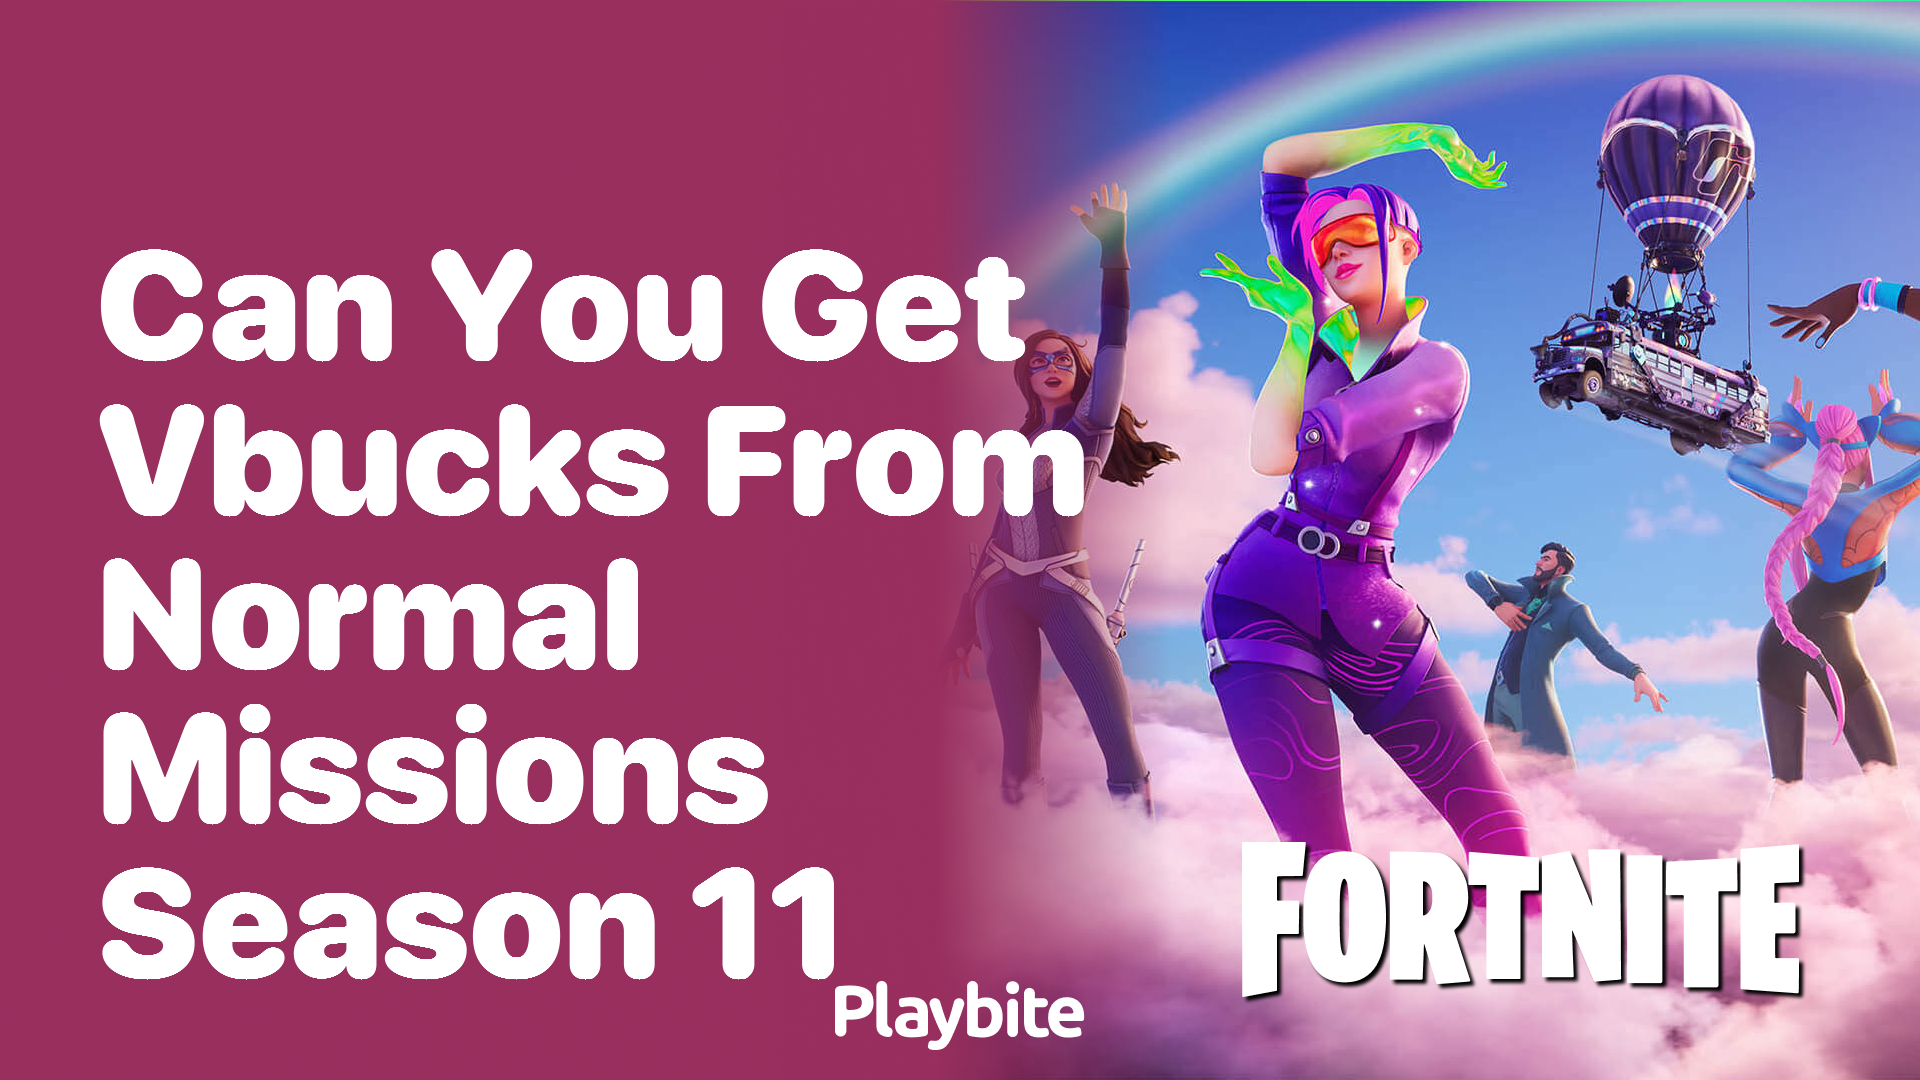 Can You Get V-Bucks from Normal Missions in Fortnite Season 11?